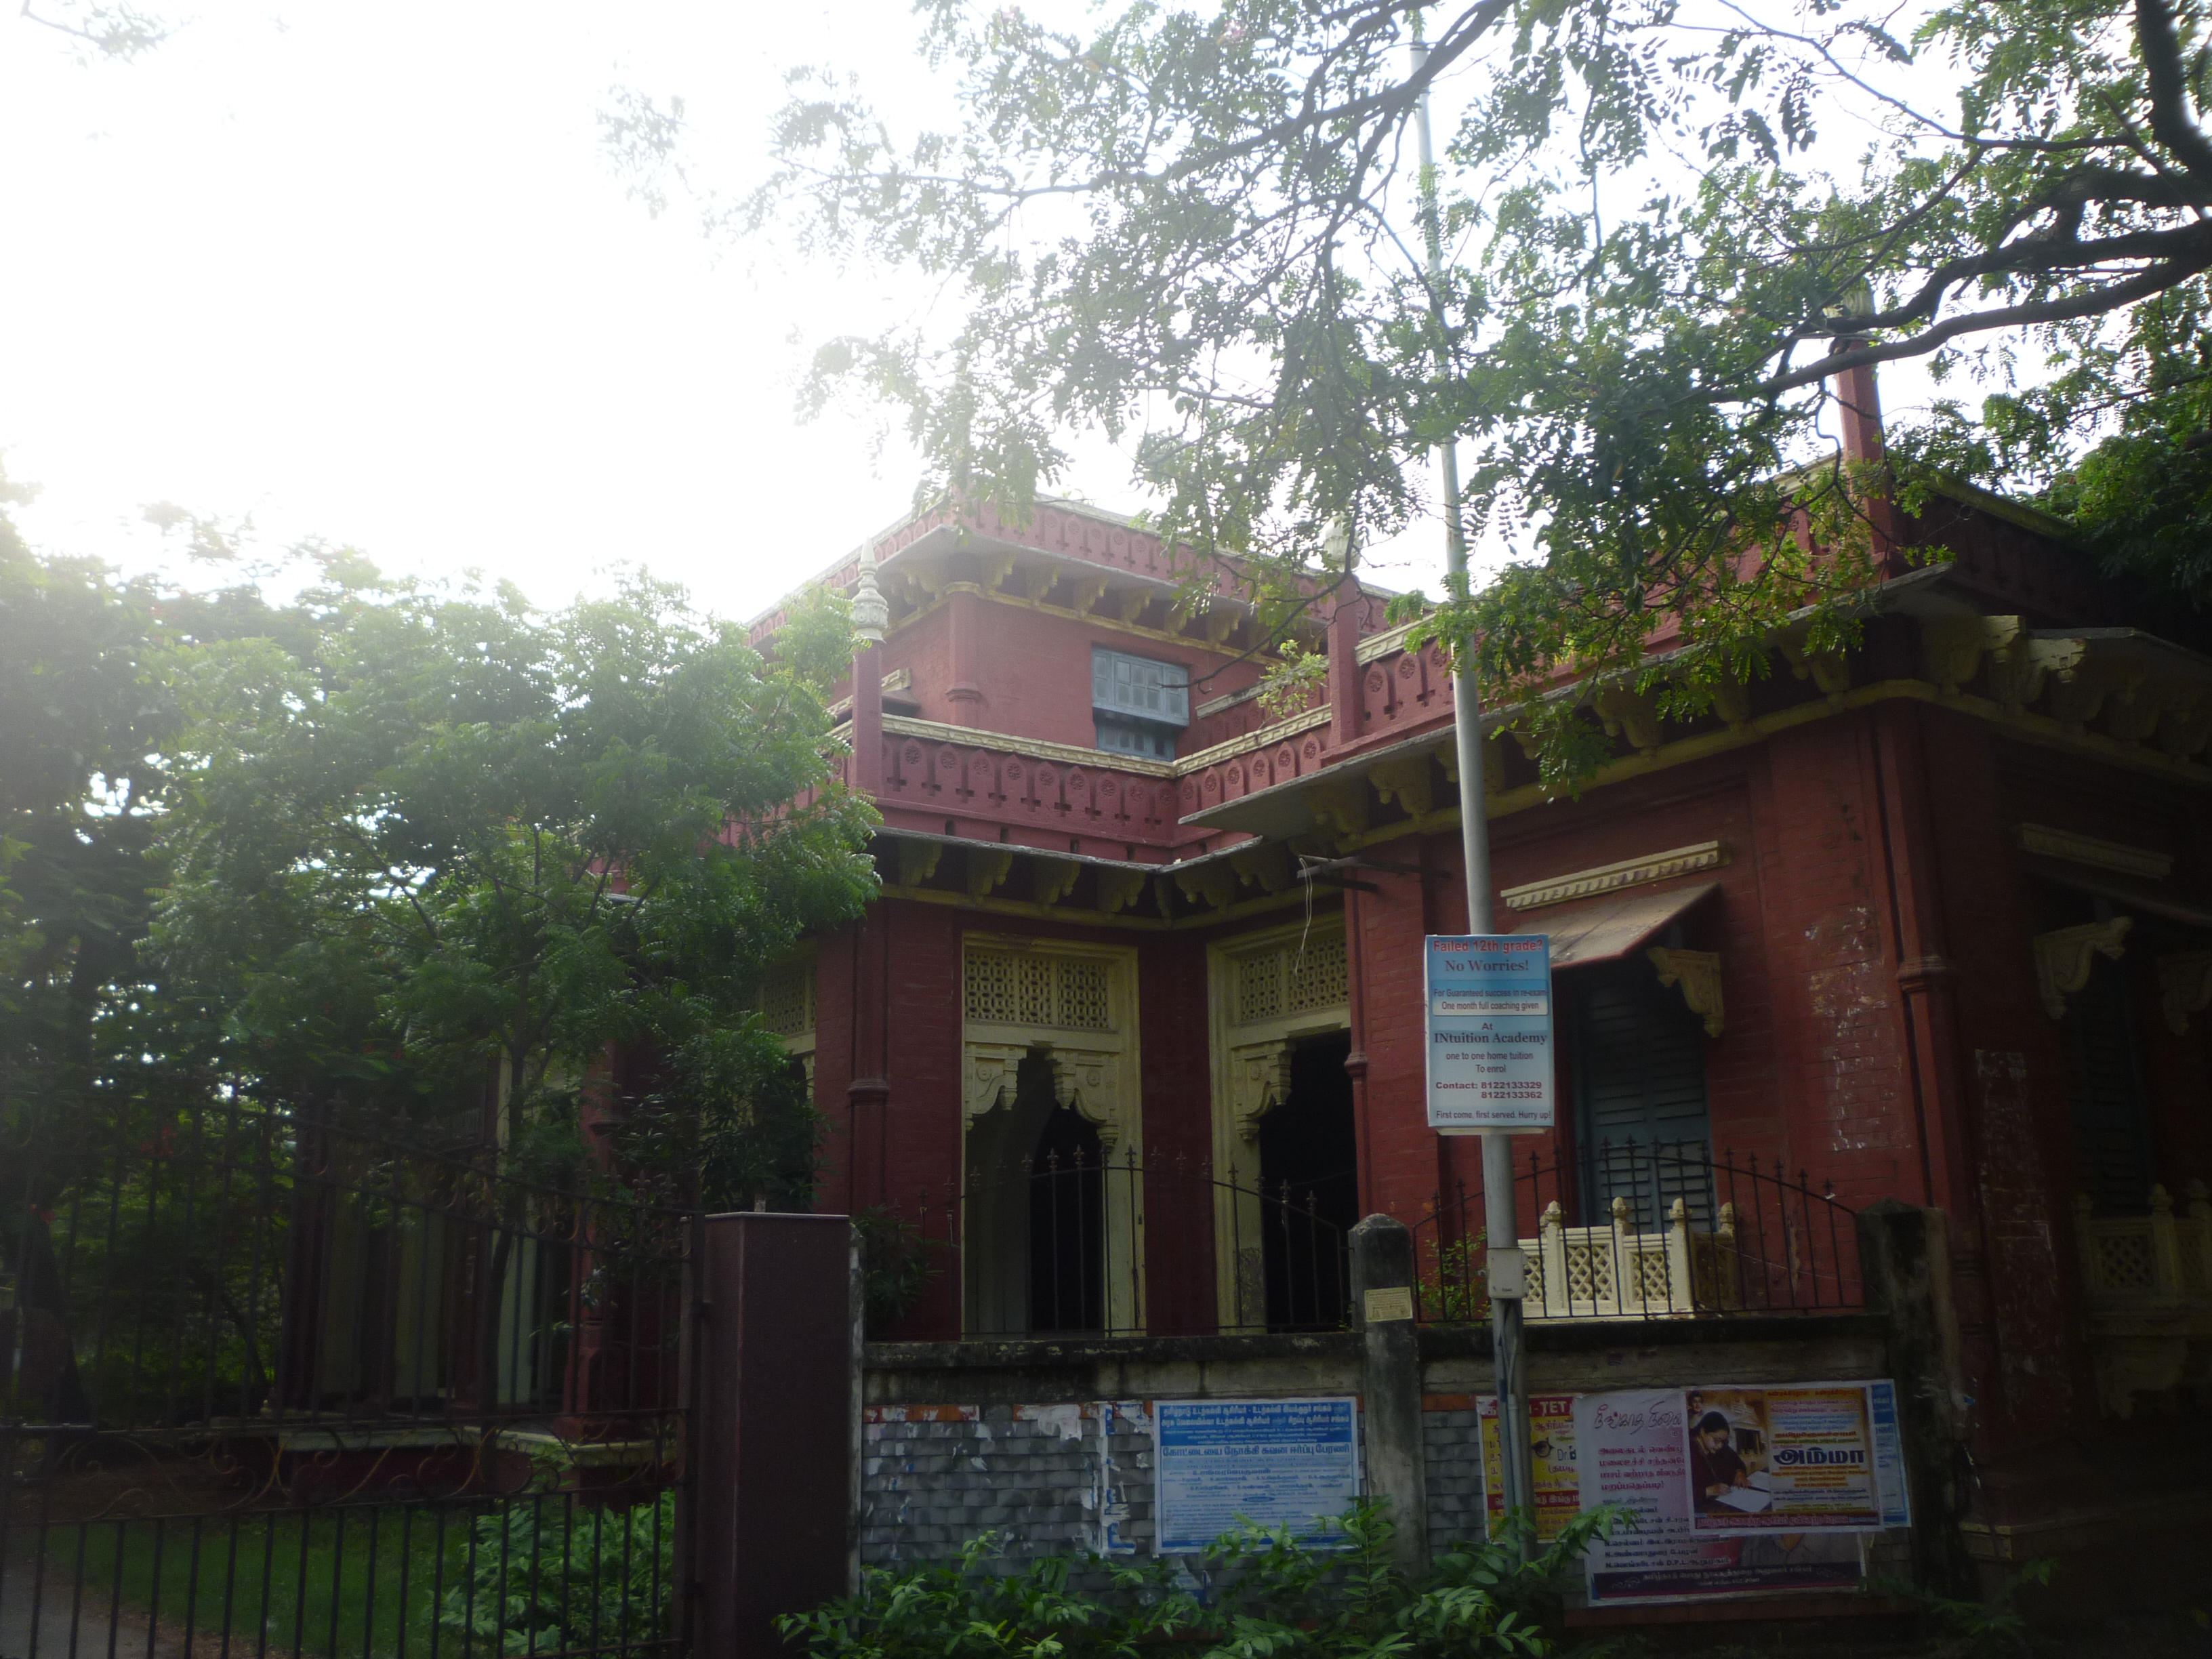 Talk on the College of Fort St George and the Madras Literary Society